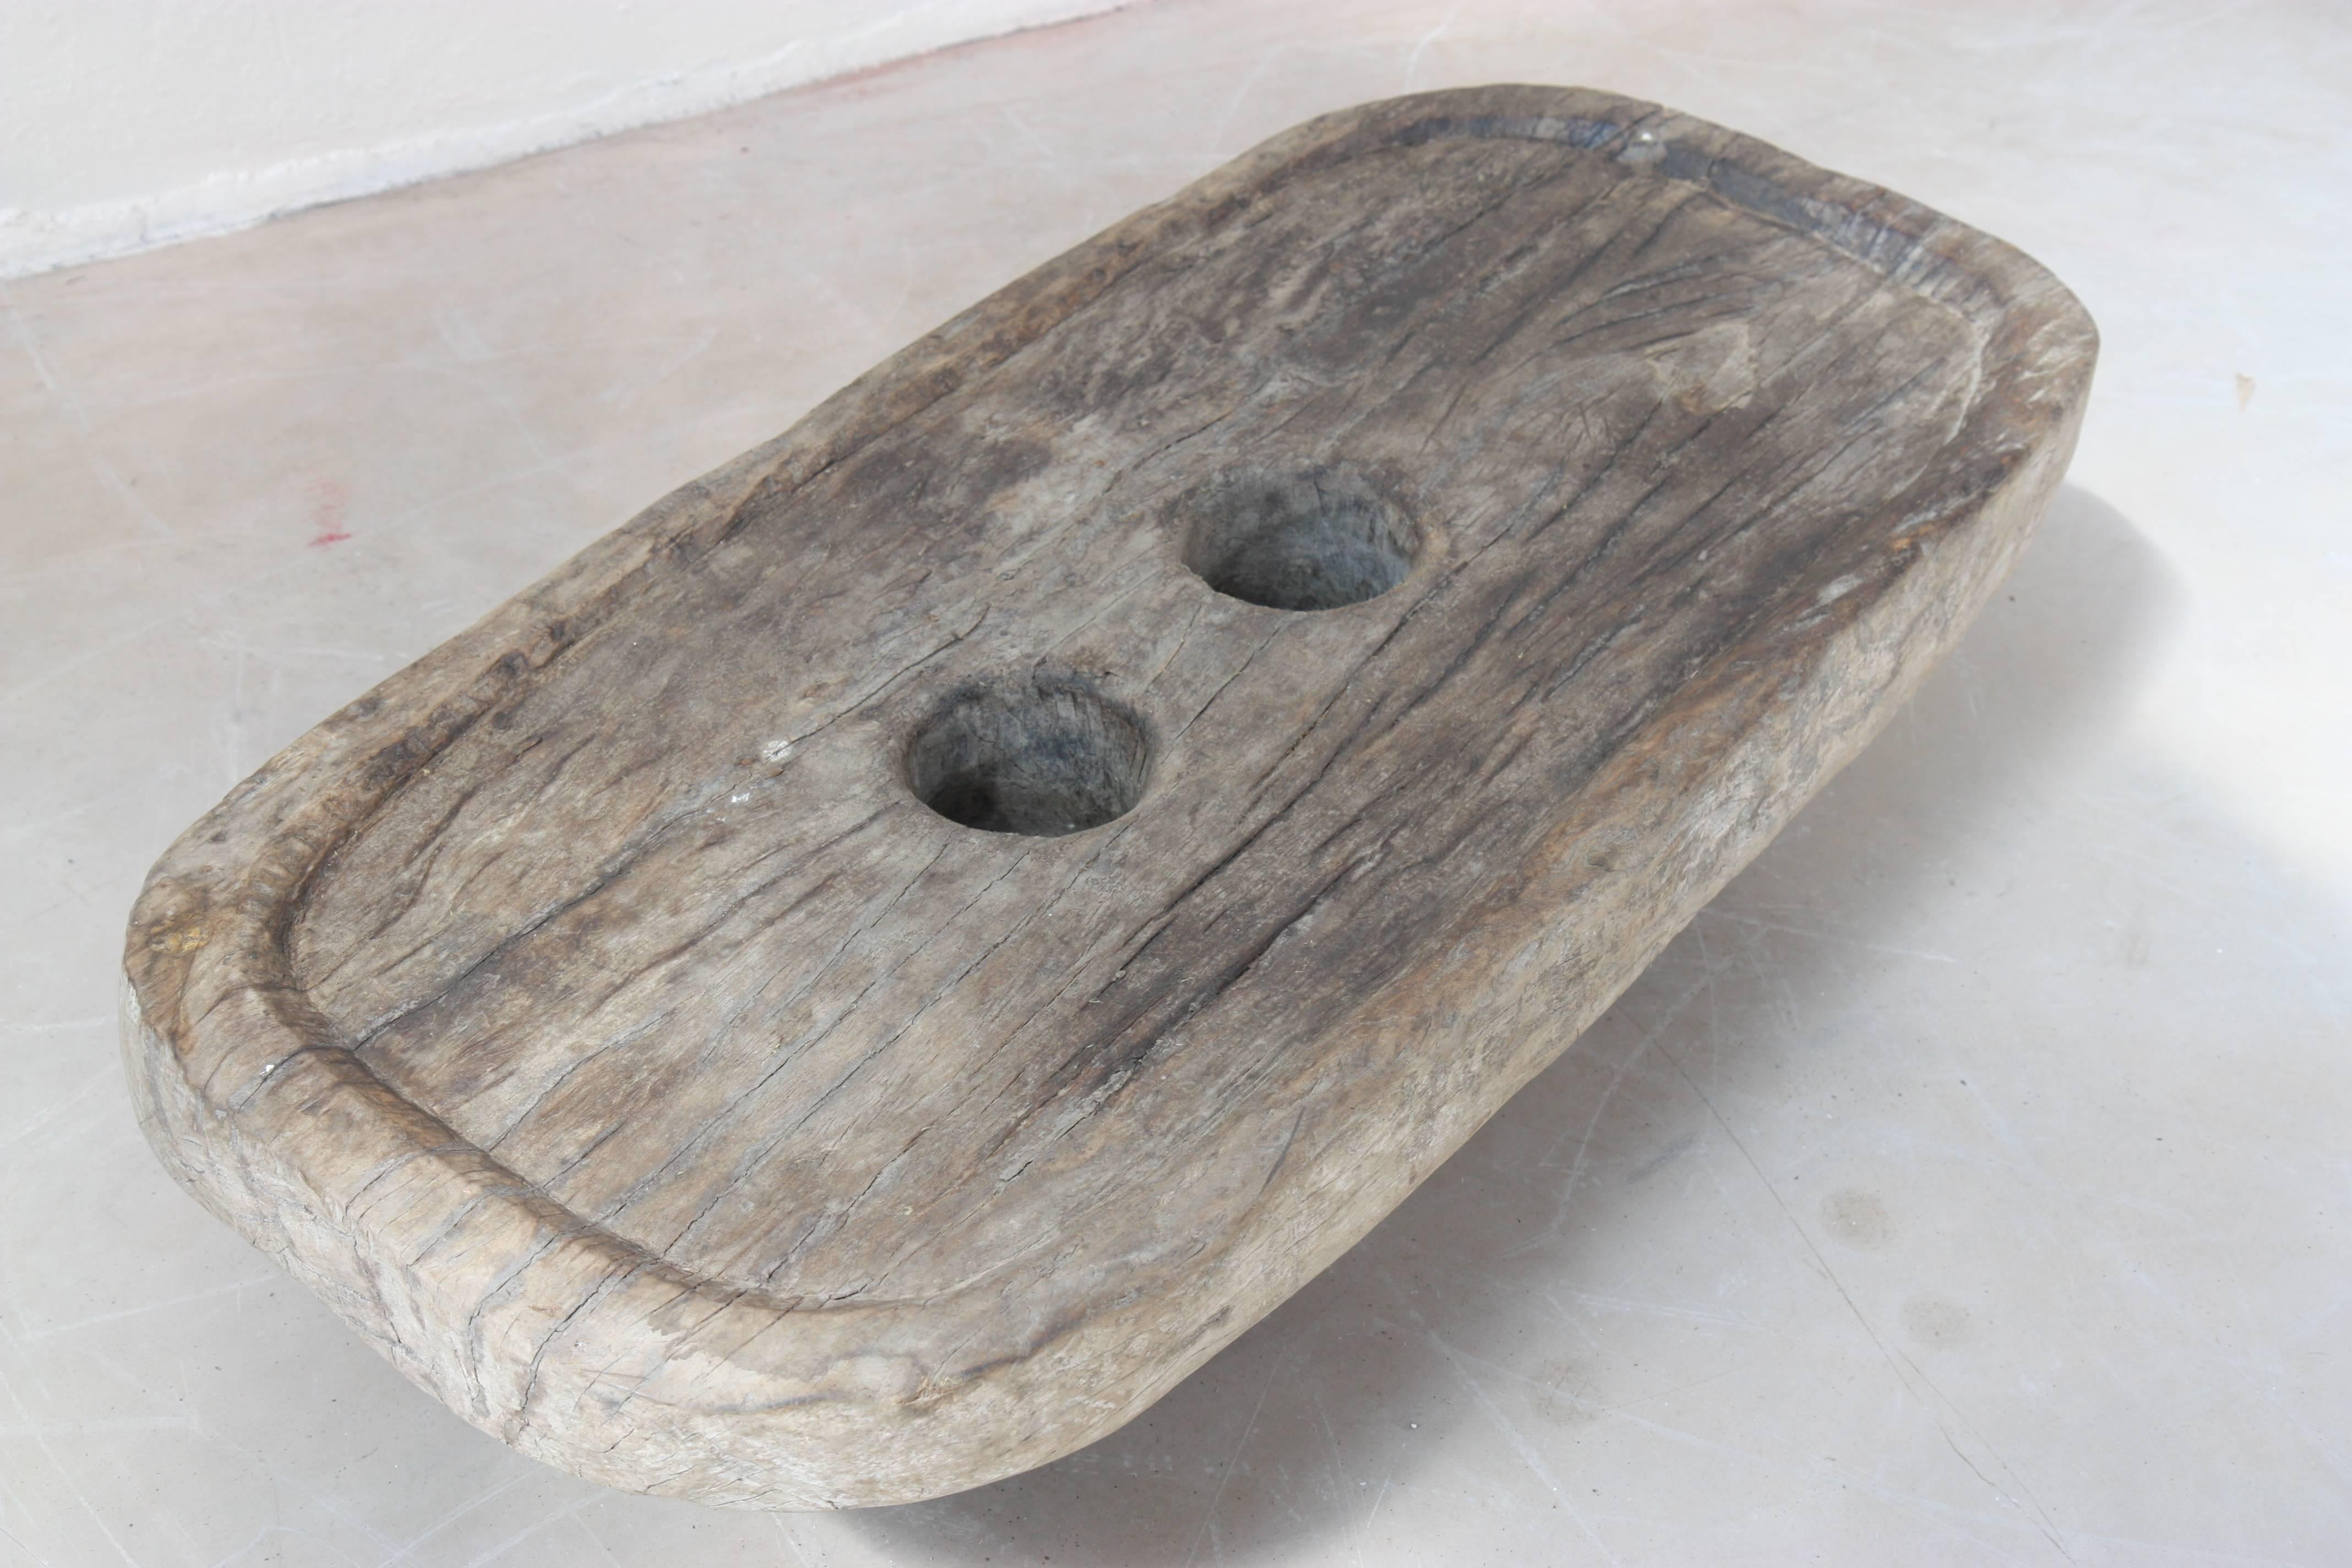 In oval shape teak with two holes on the tray.
Provenance: North East India.